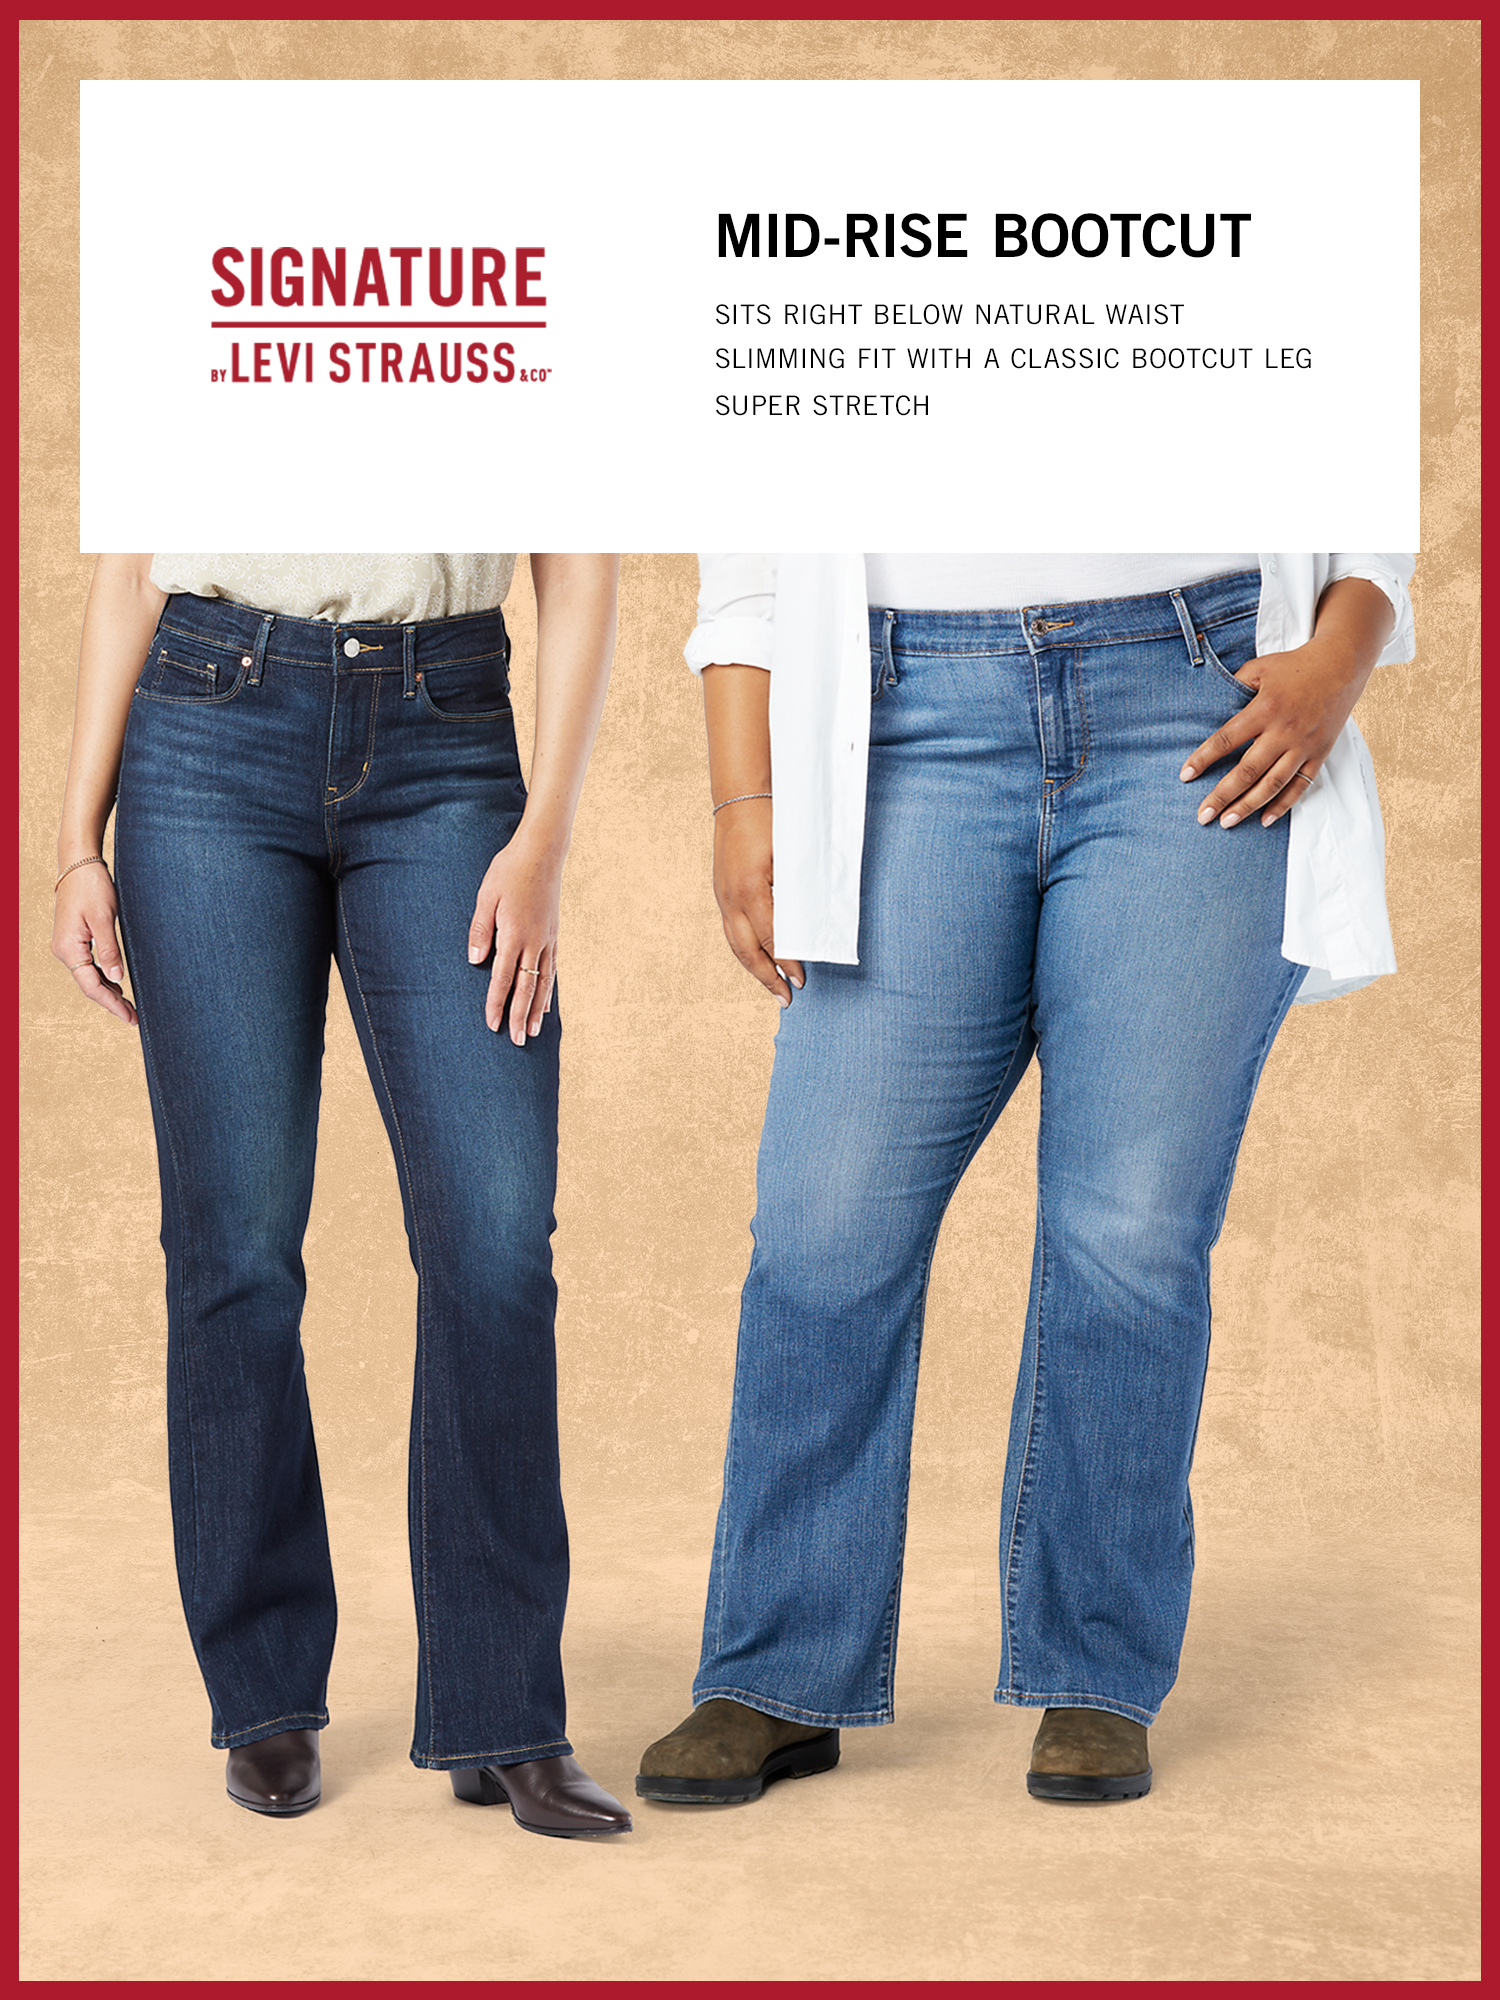 Signature by Levi Strauss & Co. Women's and Women's Plus Modern Bootcut Jeans - image 2 of 7